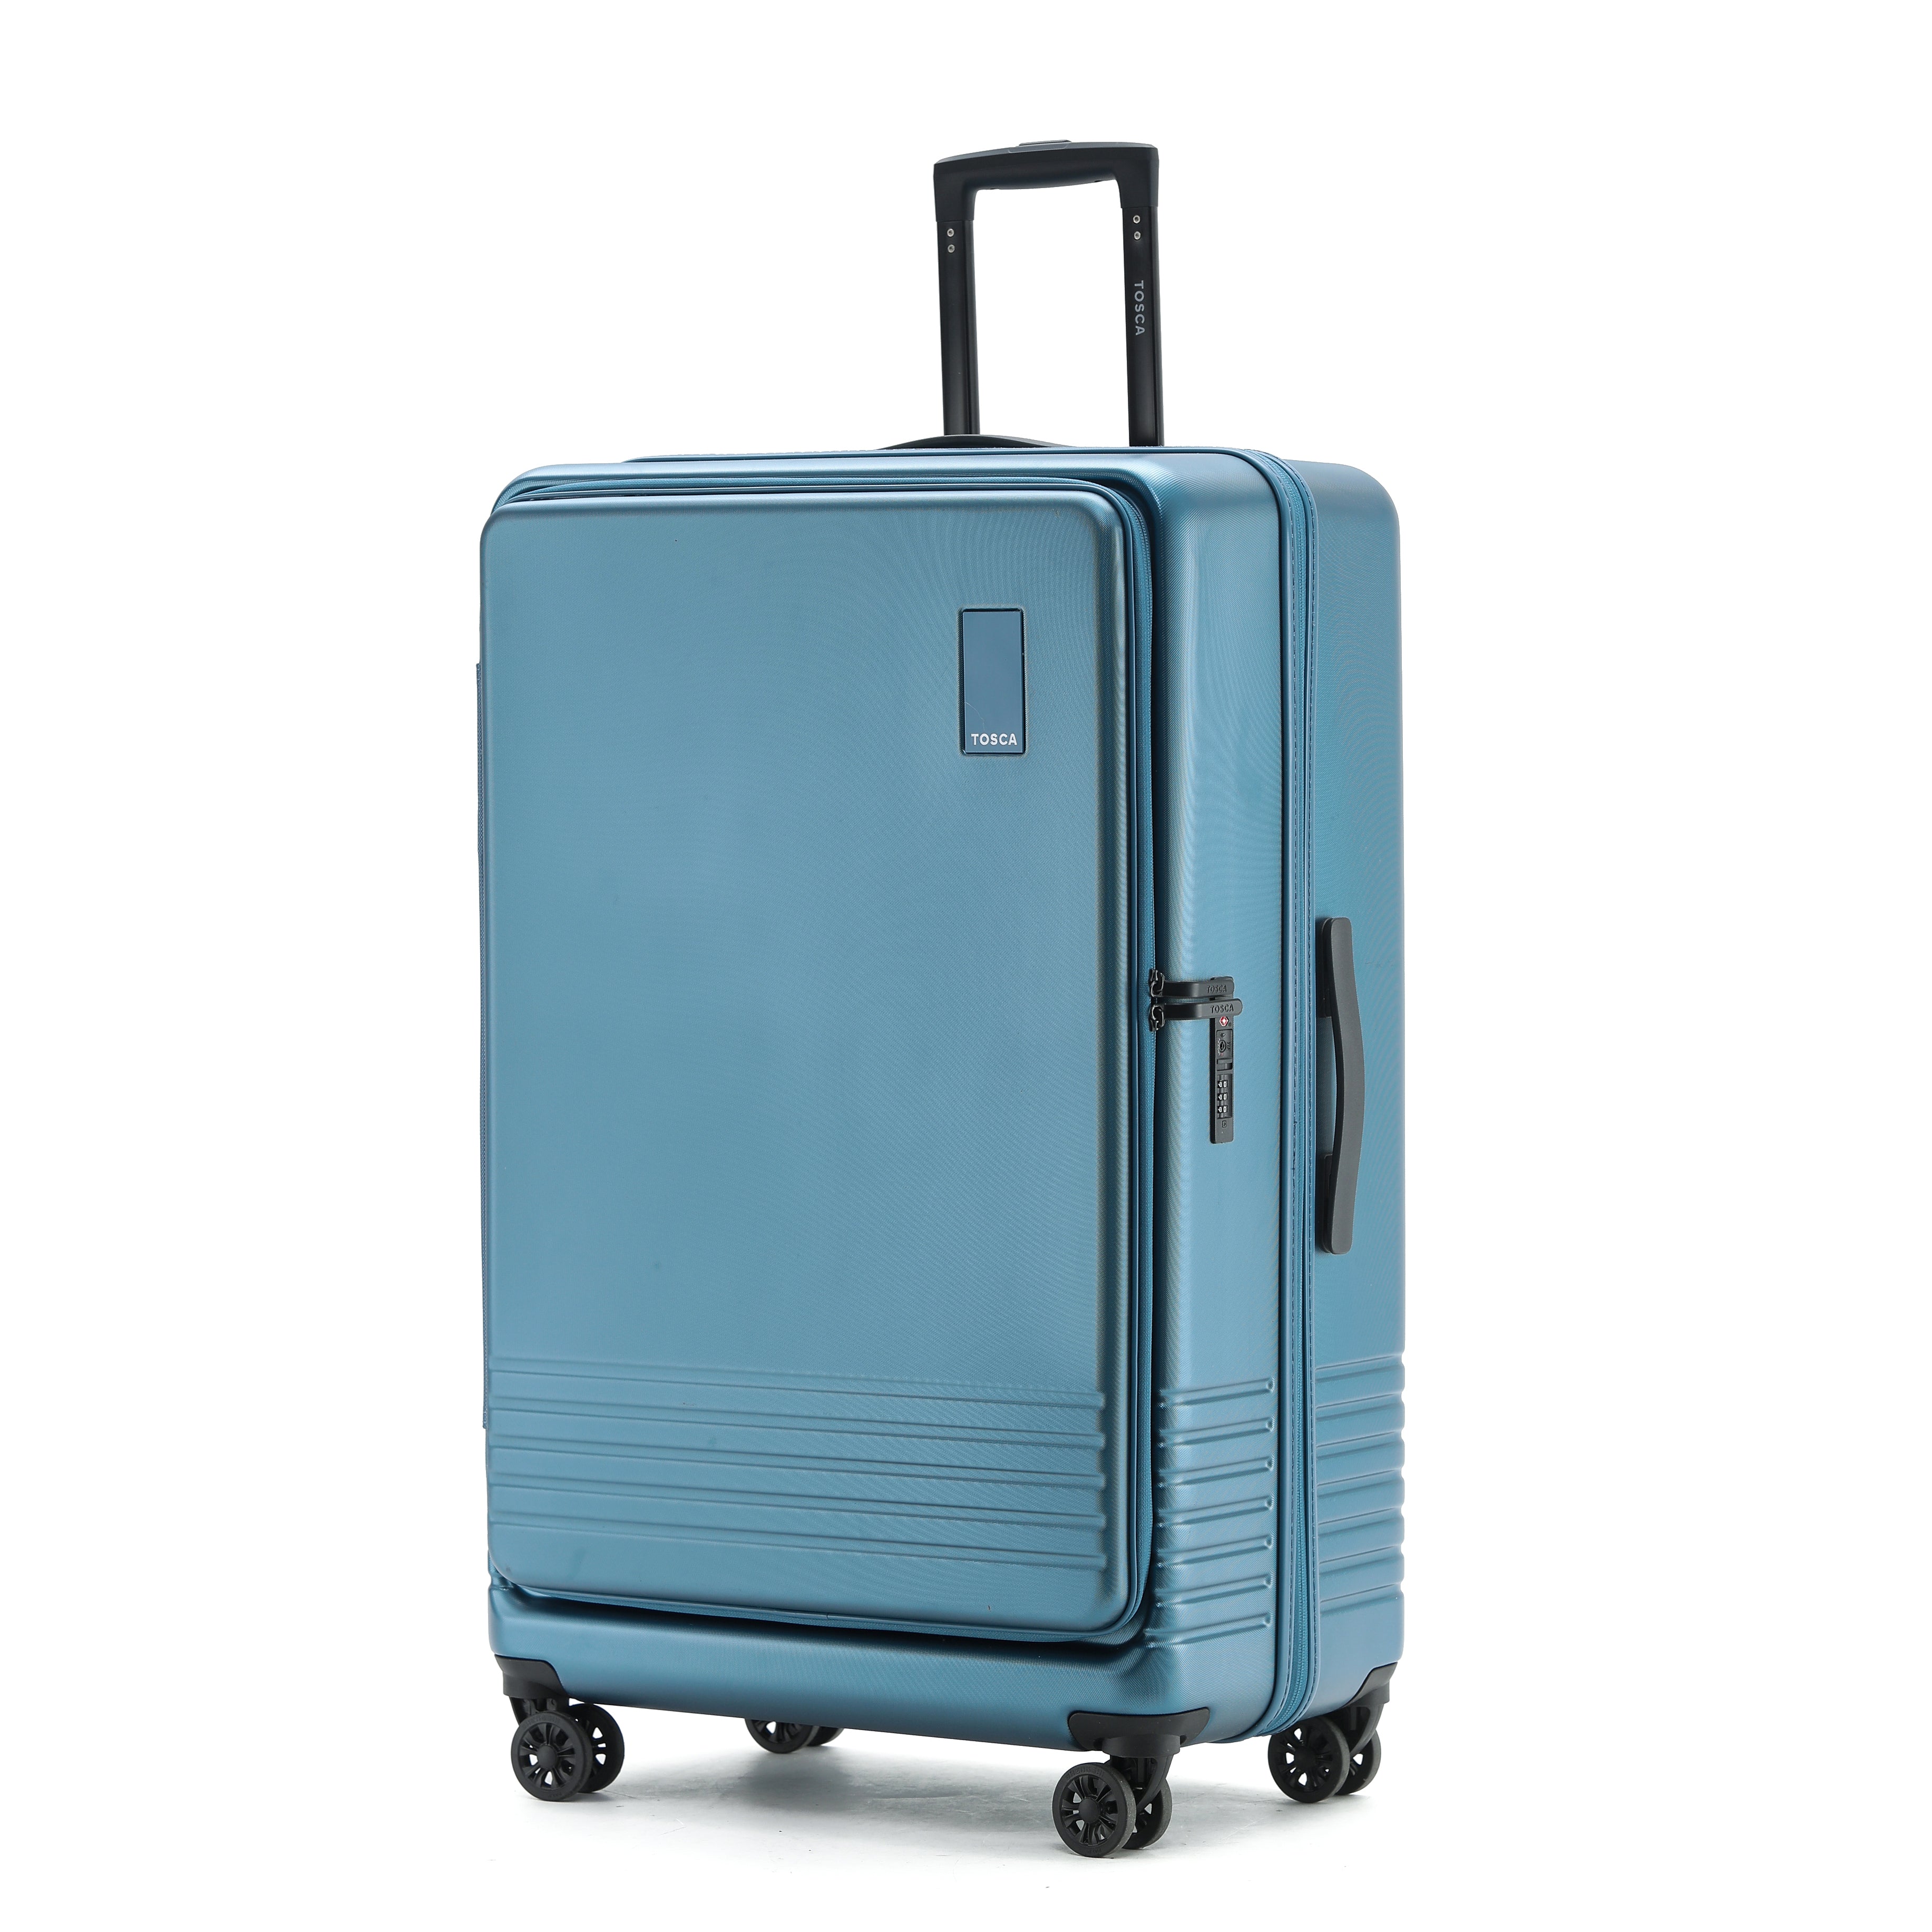 Tosca - TCA644 Horizon Front lid opening Set of 3 suitcases - Blue-7